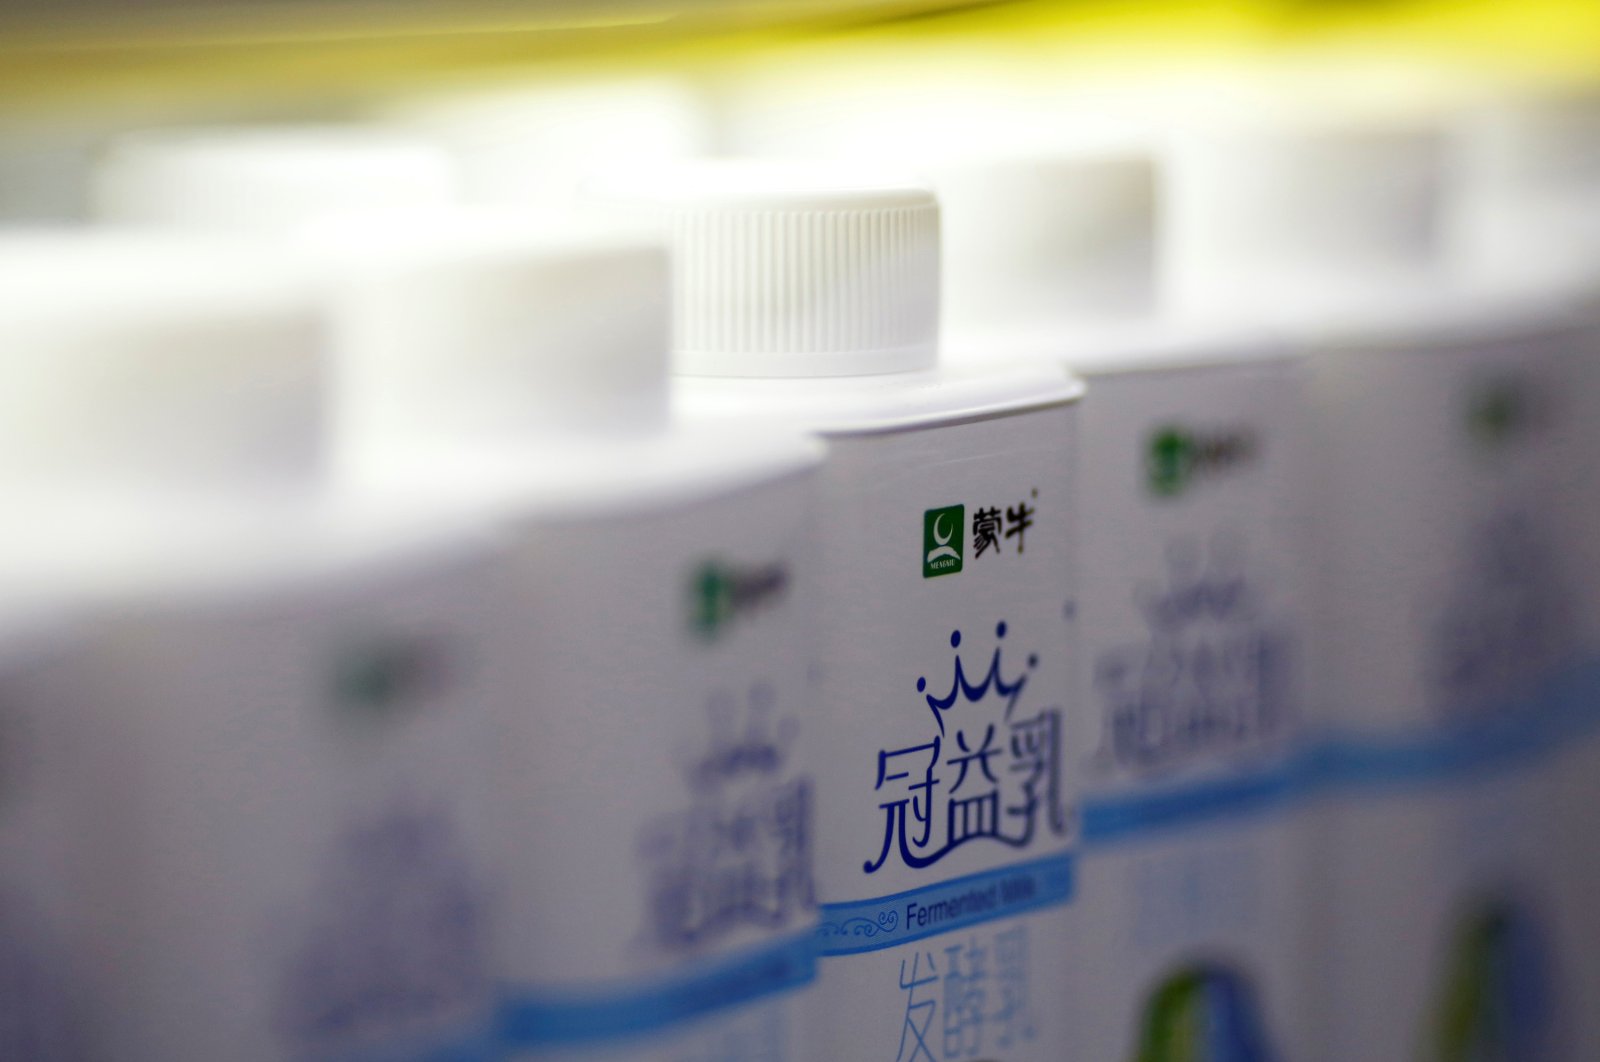 Mengniu milk products are displayed at a supermarket in Beijing, China, Feb. 13, 2014. (Reuters Photo)